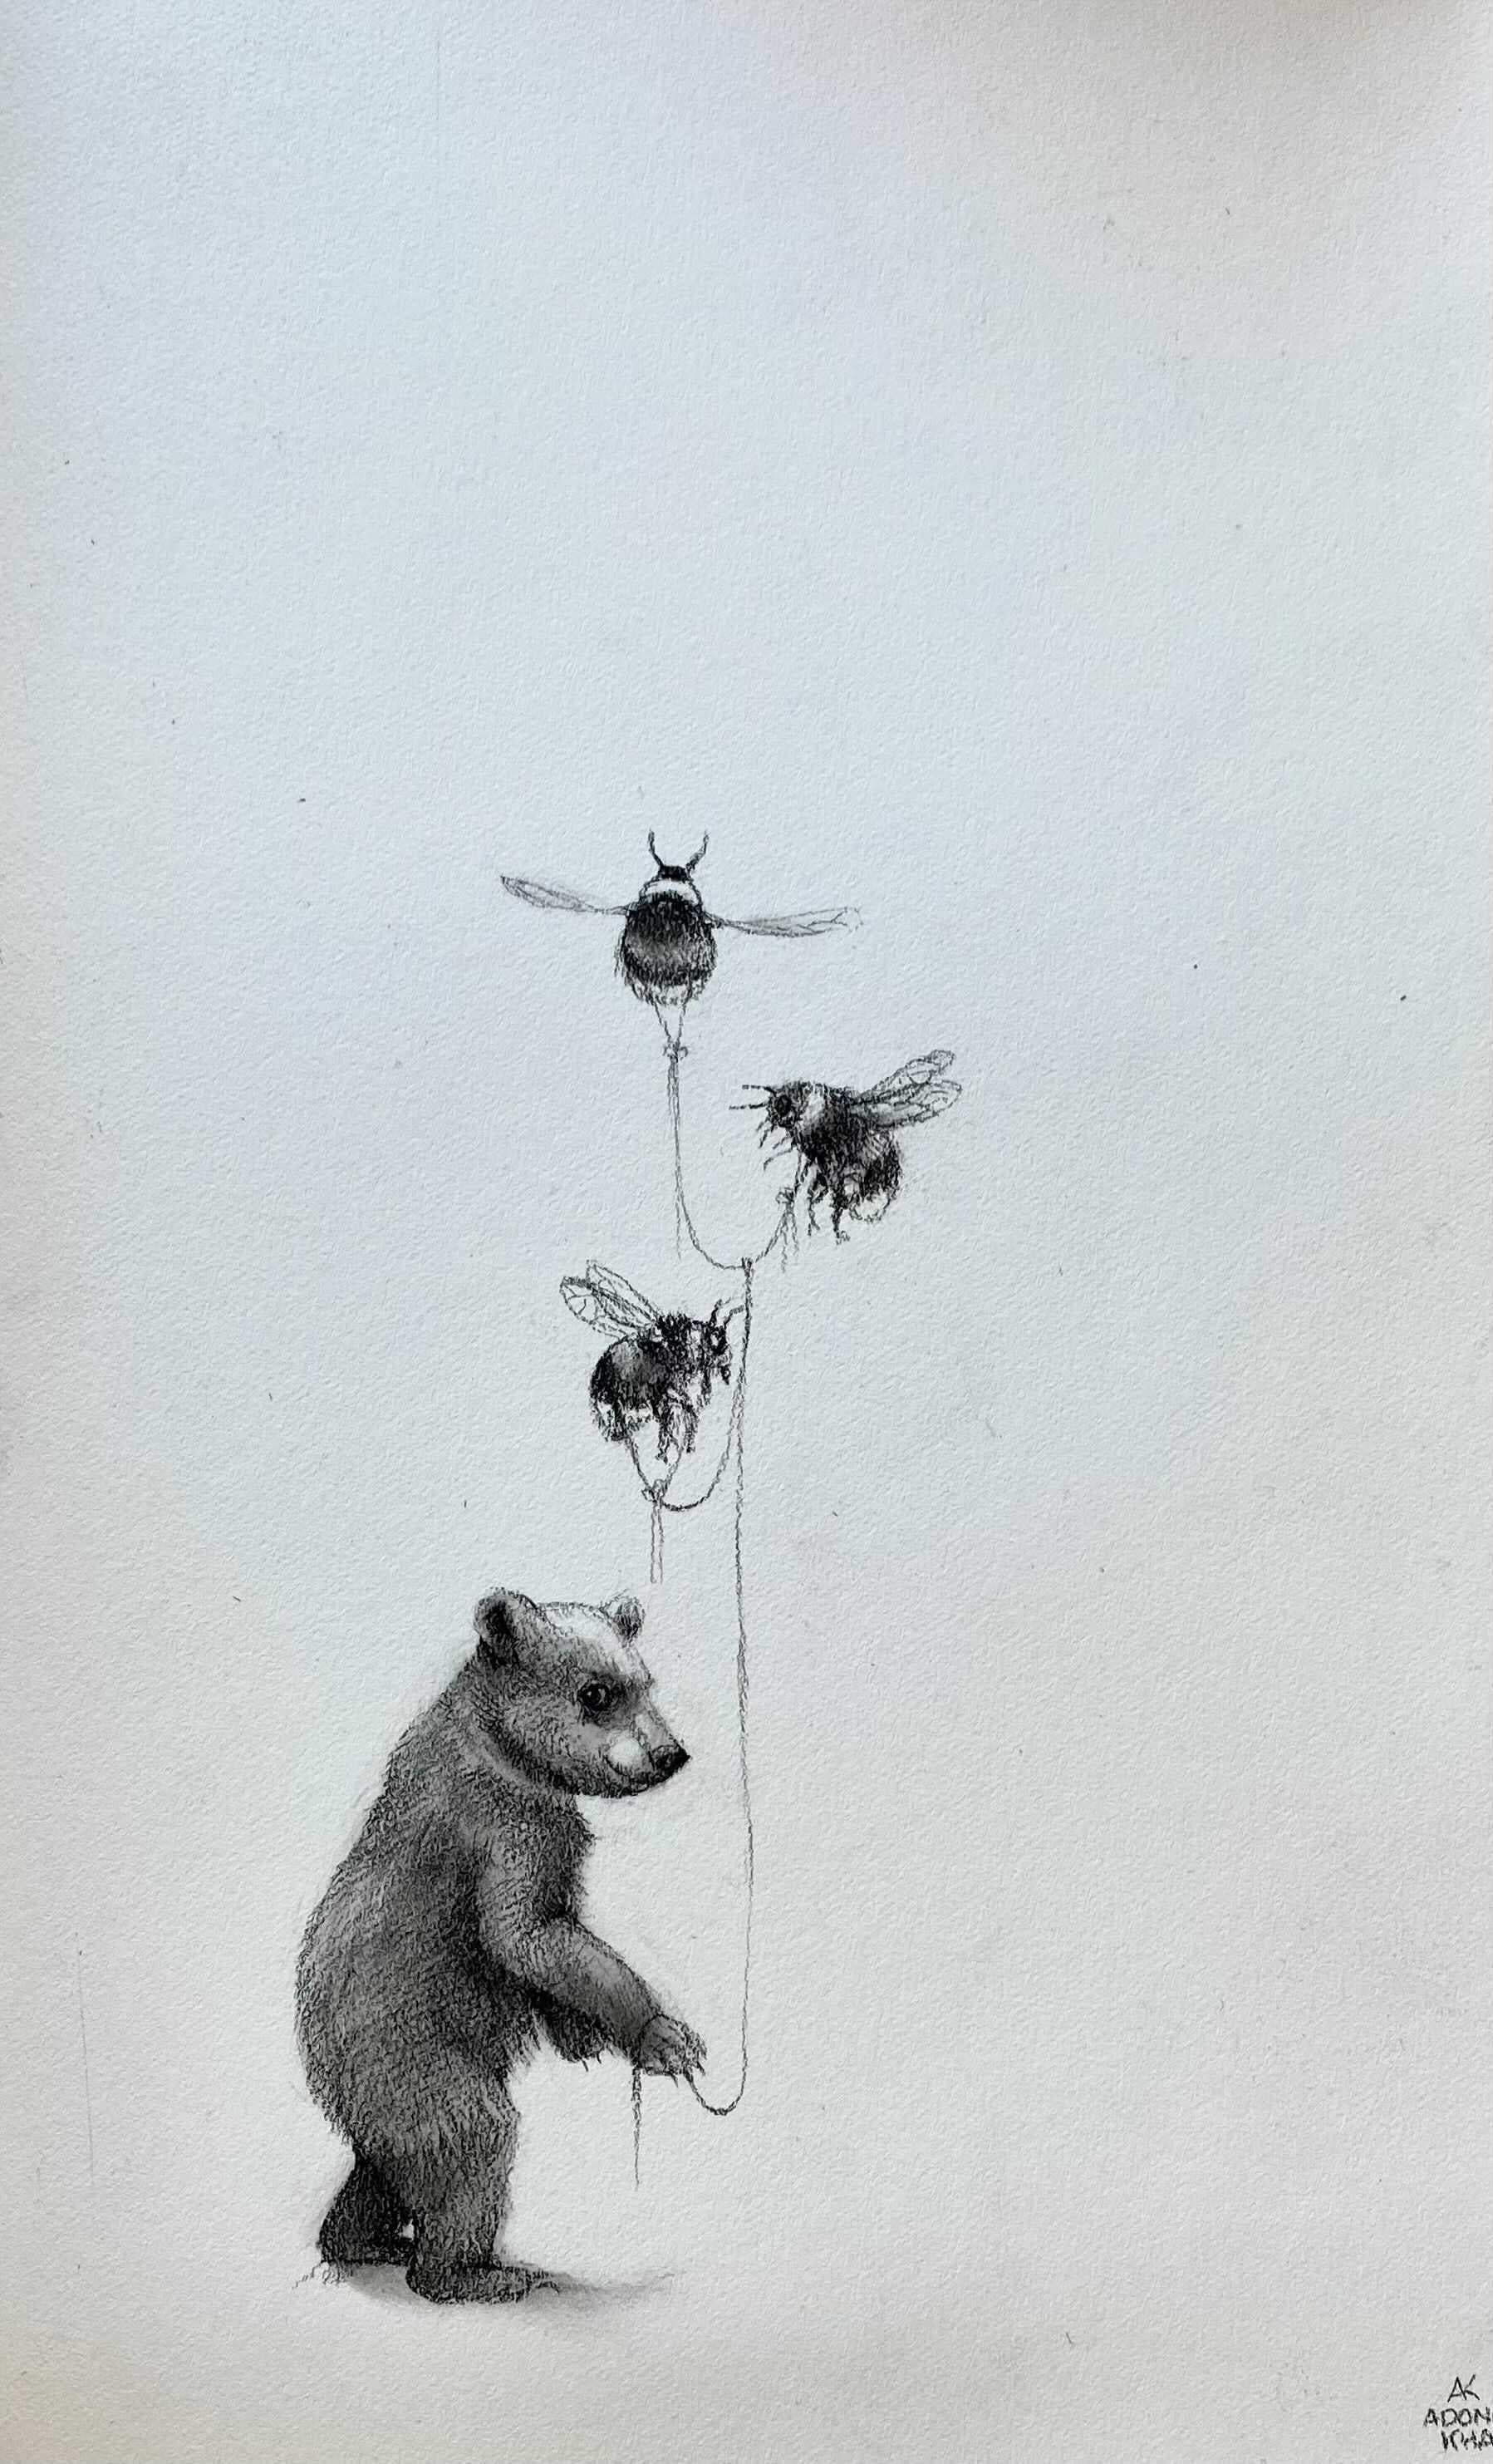 Bear and Bumble Bees - Art by Adonna Khare